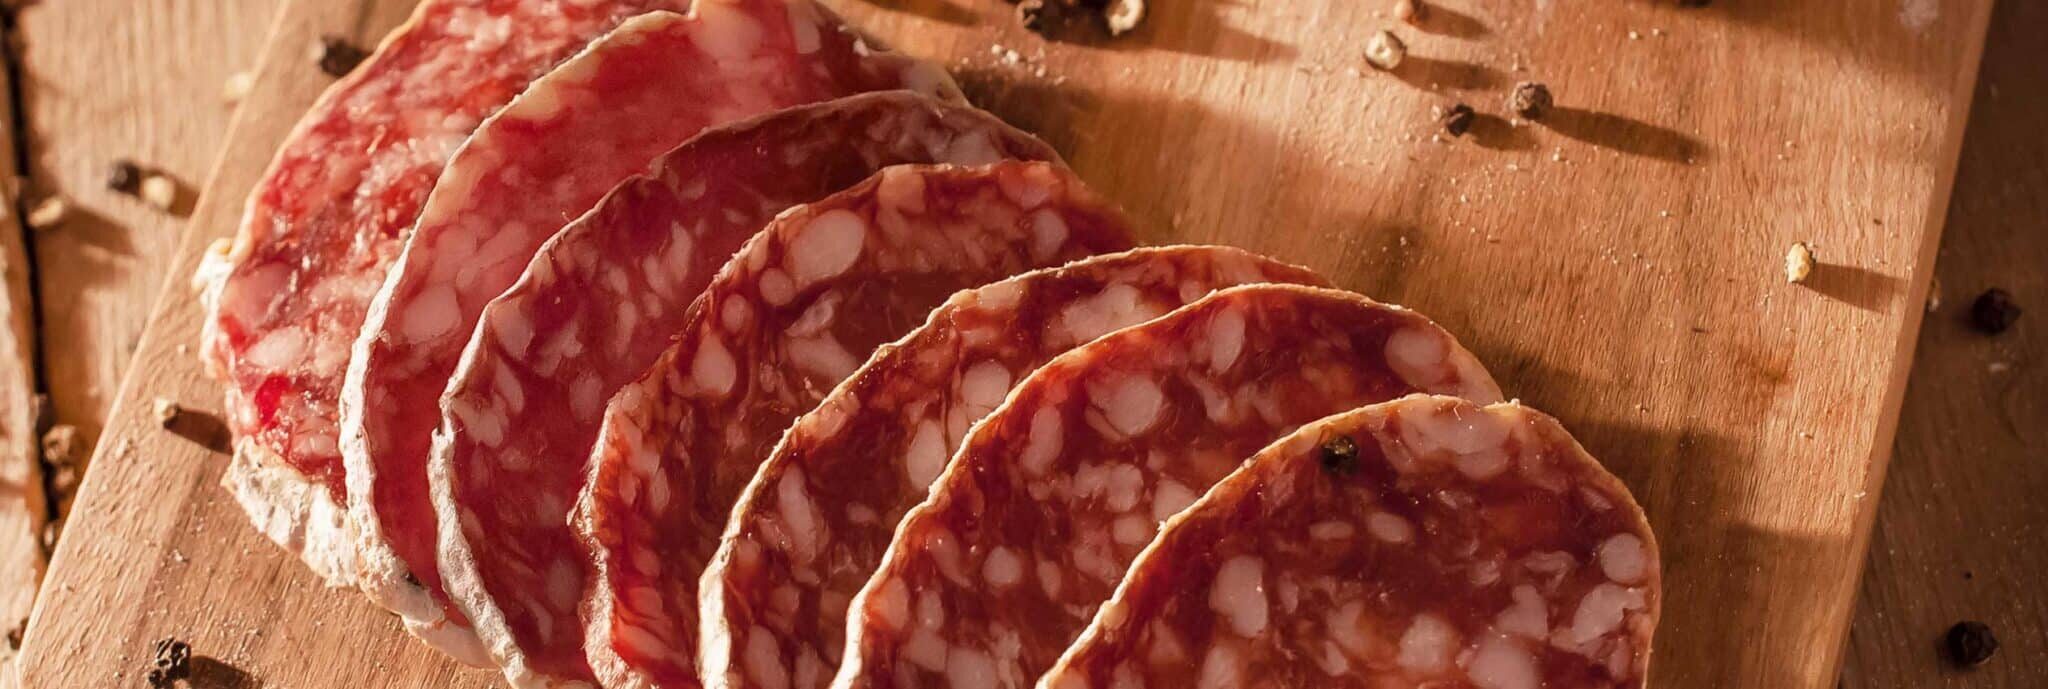 Salame Brianza DOP - Wine and Travel Italy